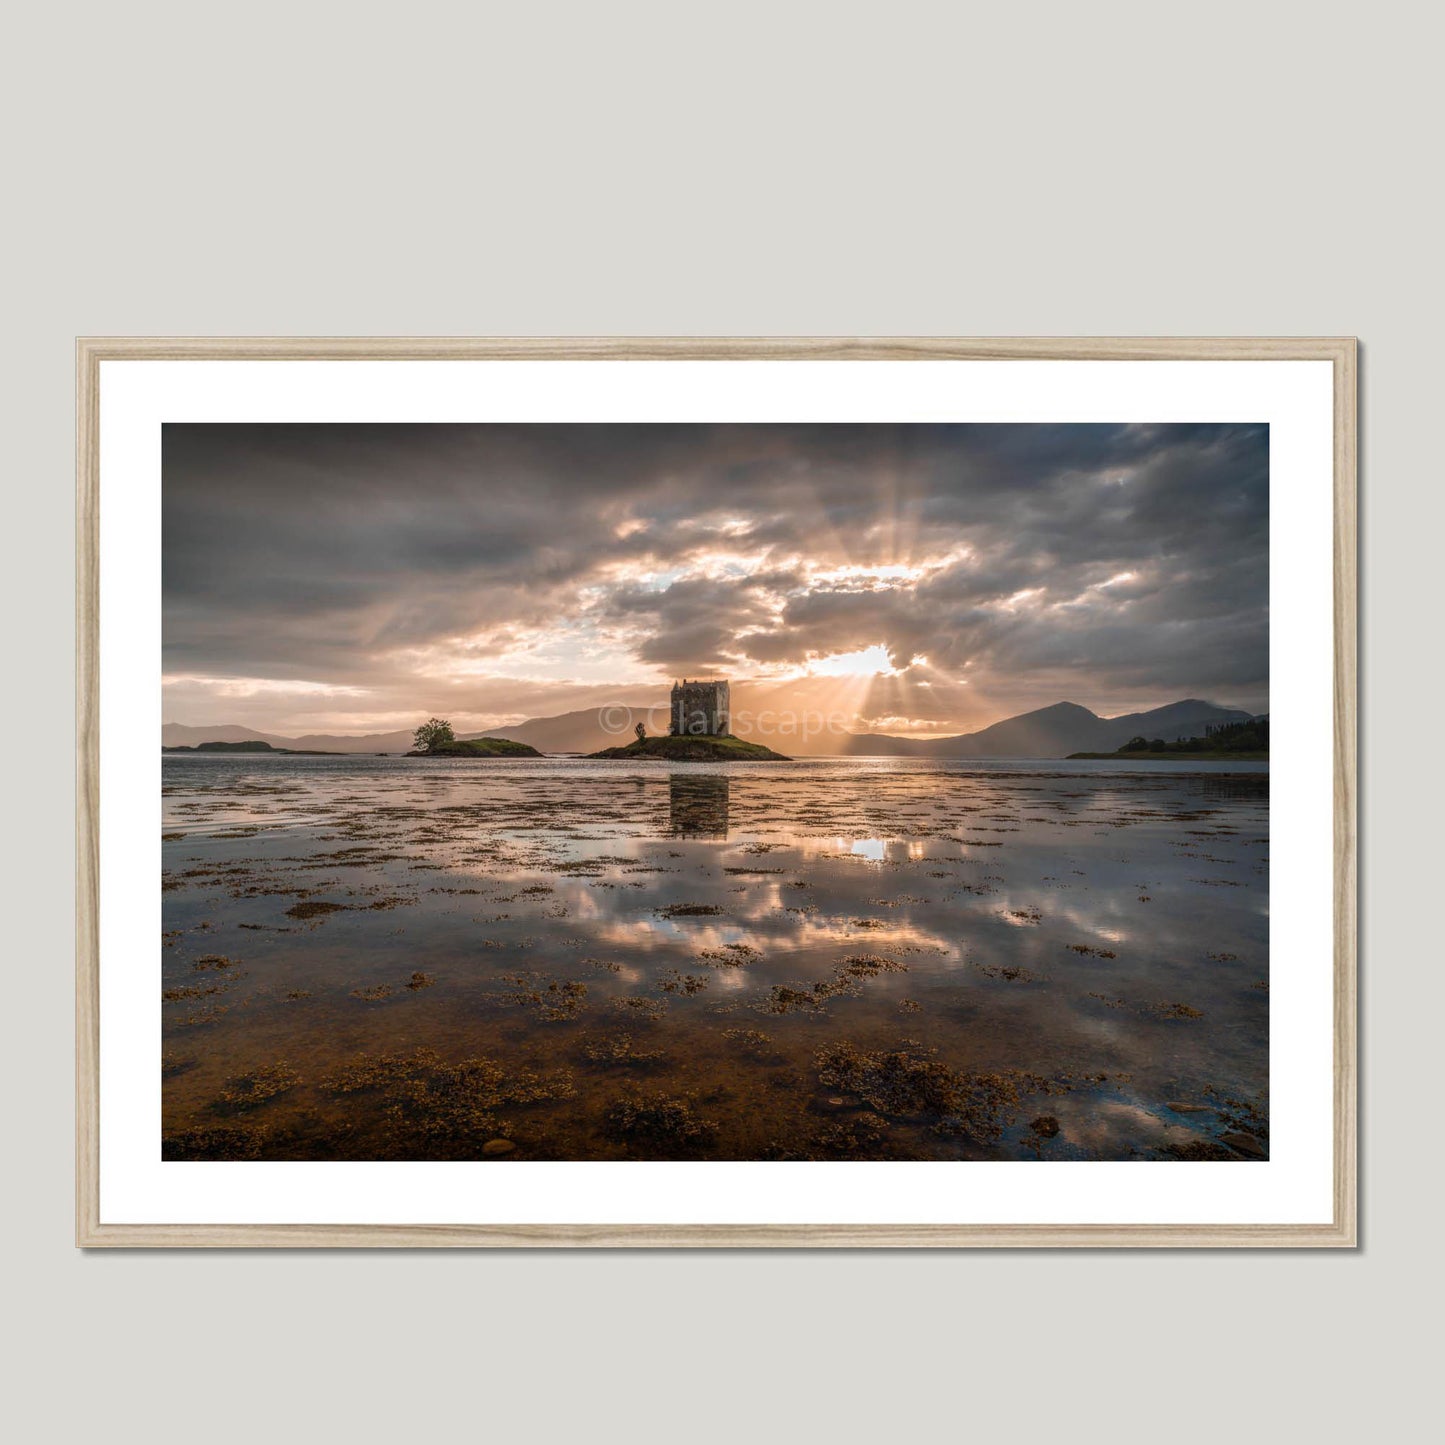 Clan Stewart of Appin - Castle Stalker - Framed & Mounted Photo Print 40"x28" Natural